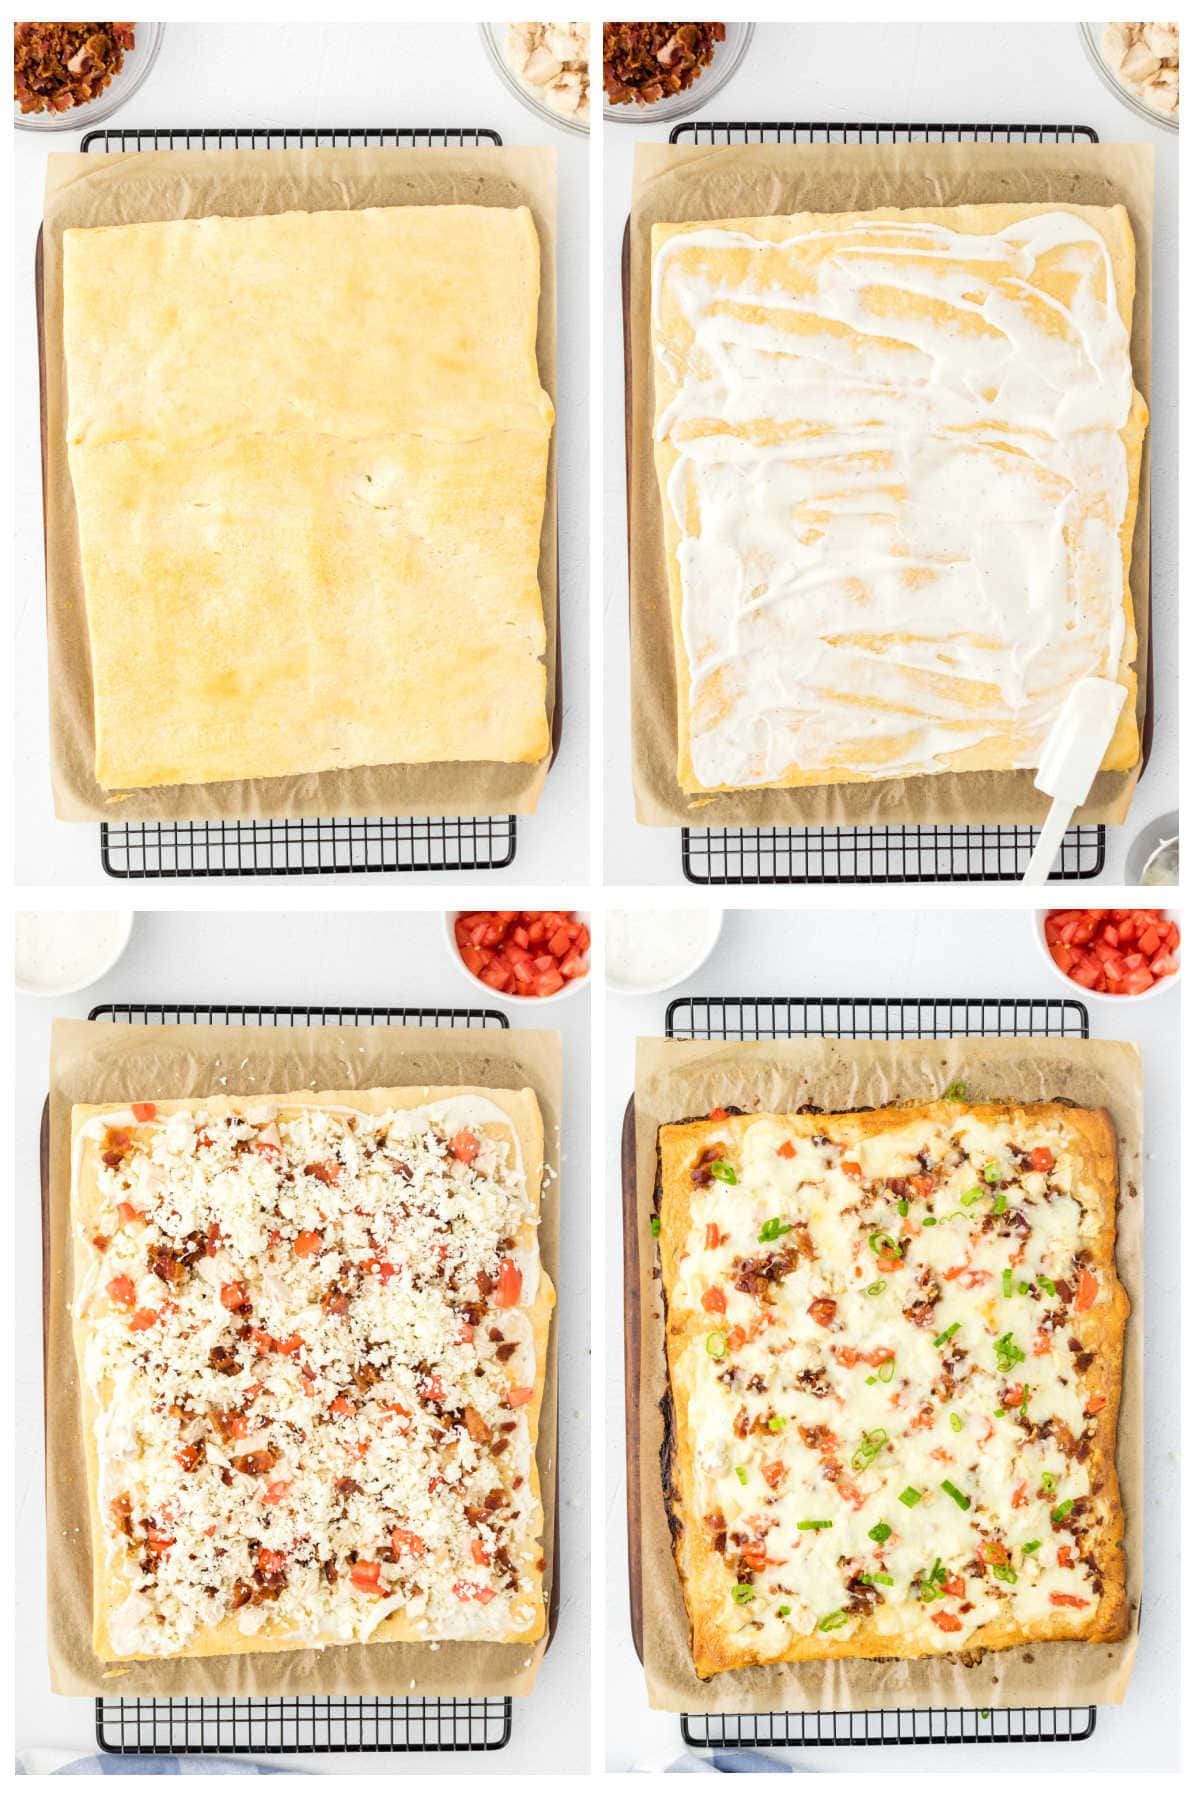 Step by step images showing how to make the pizza.